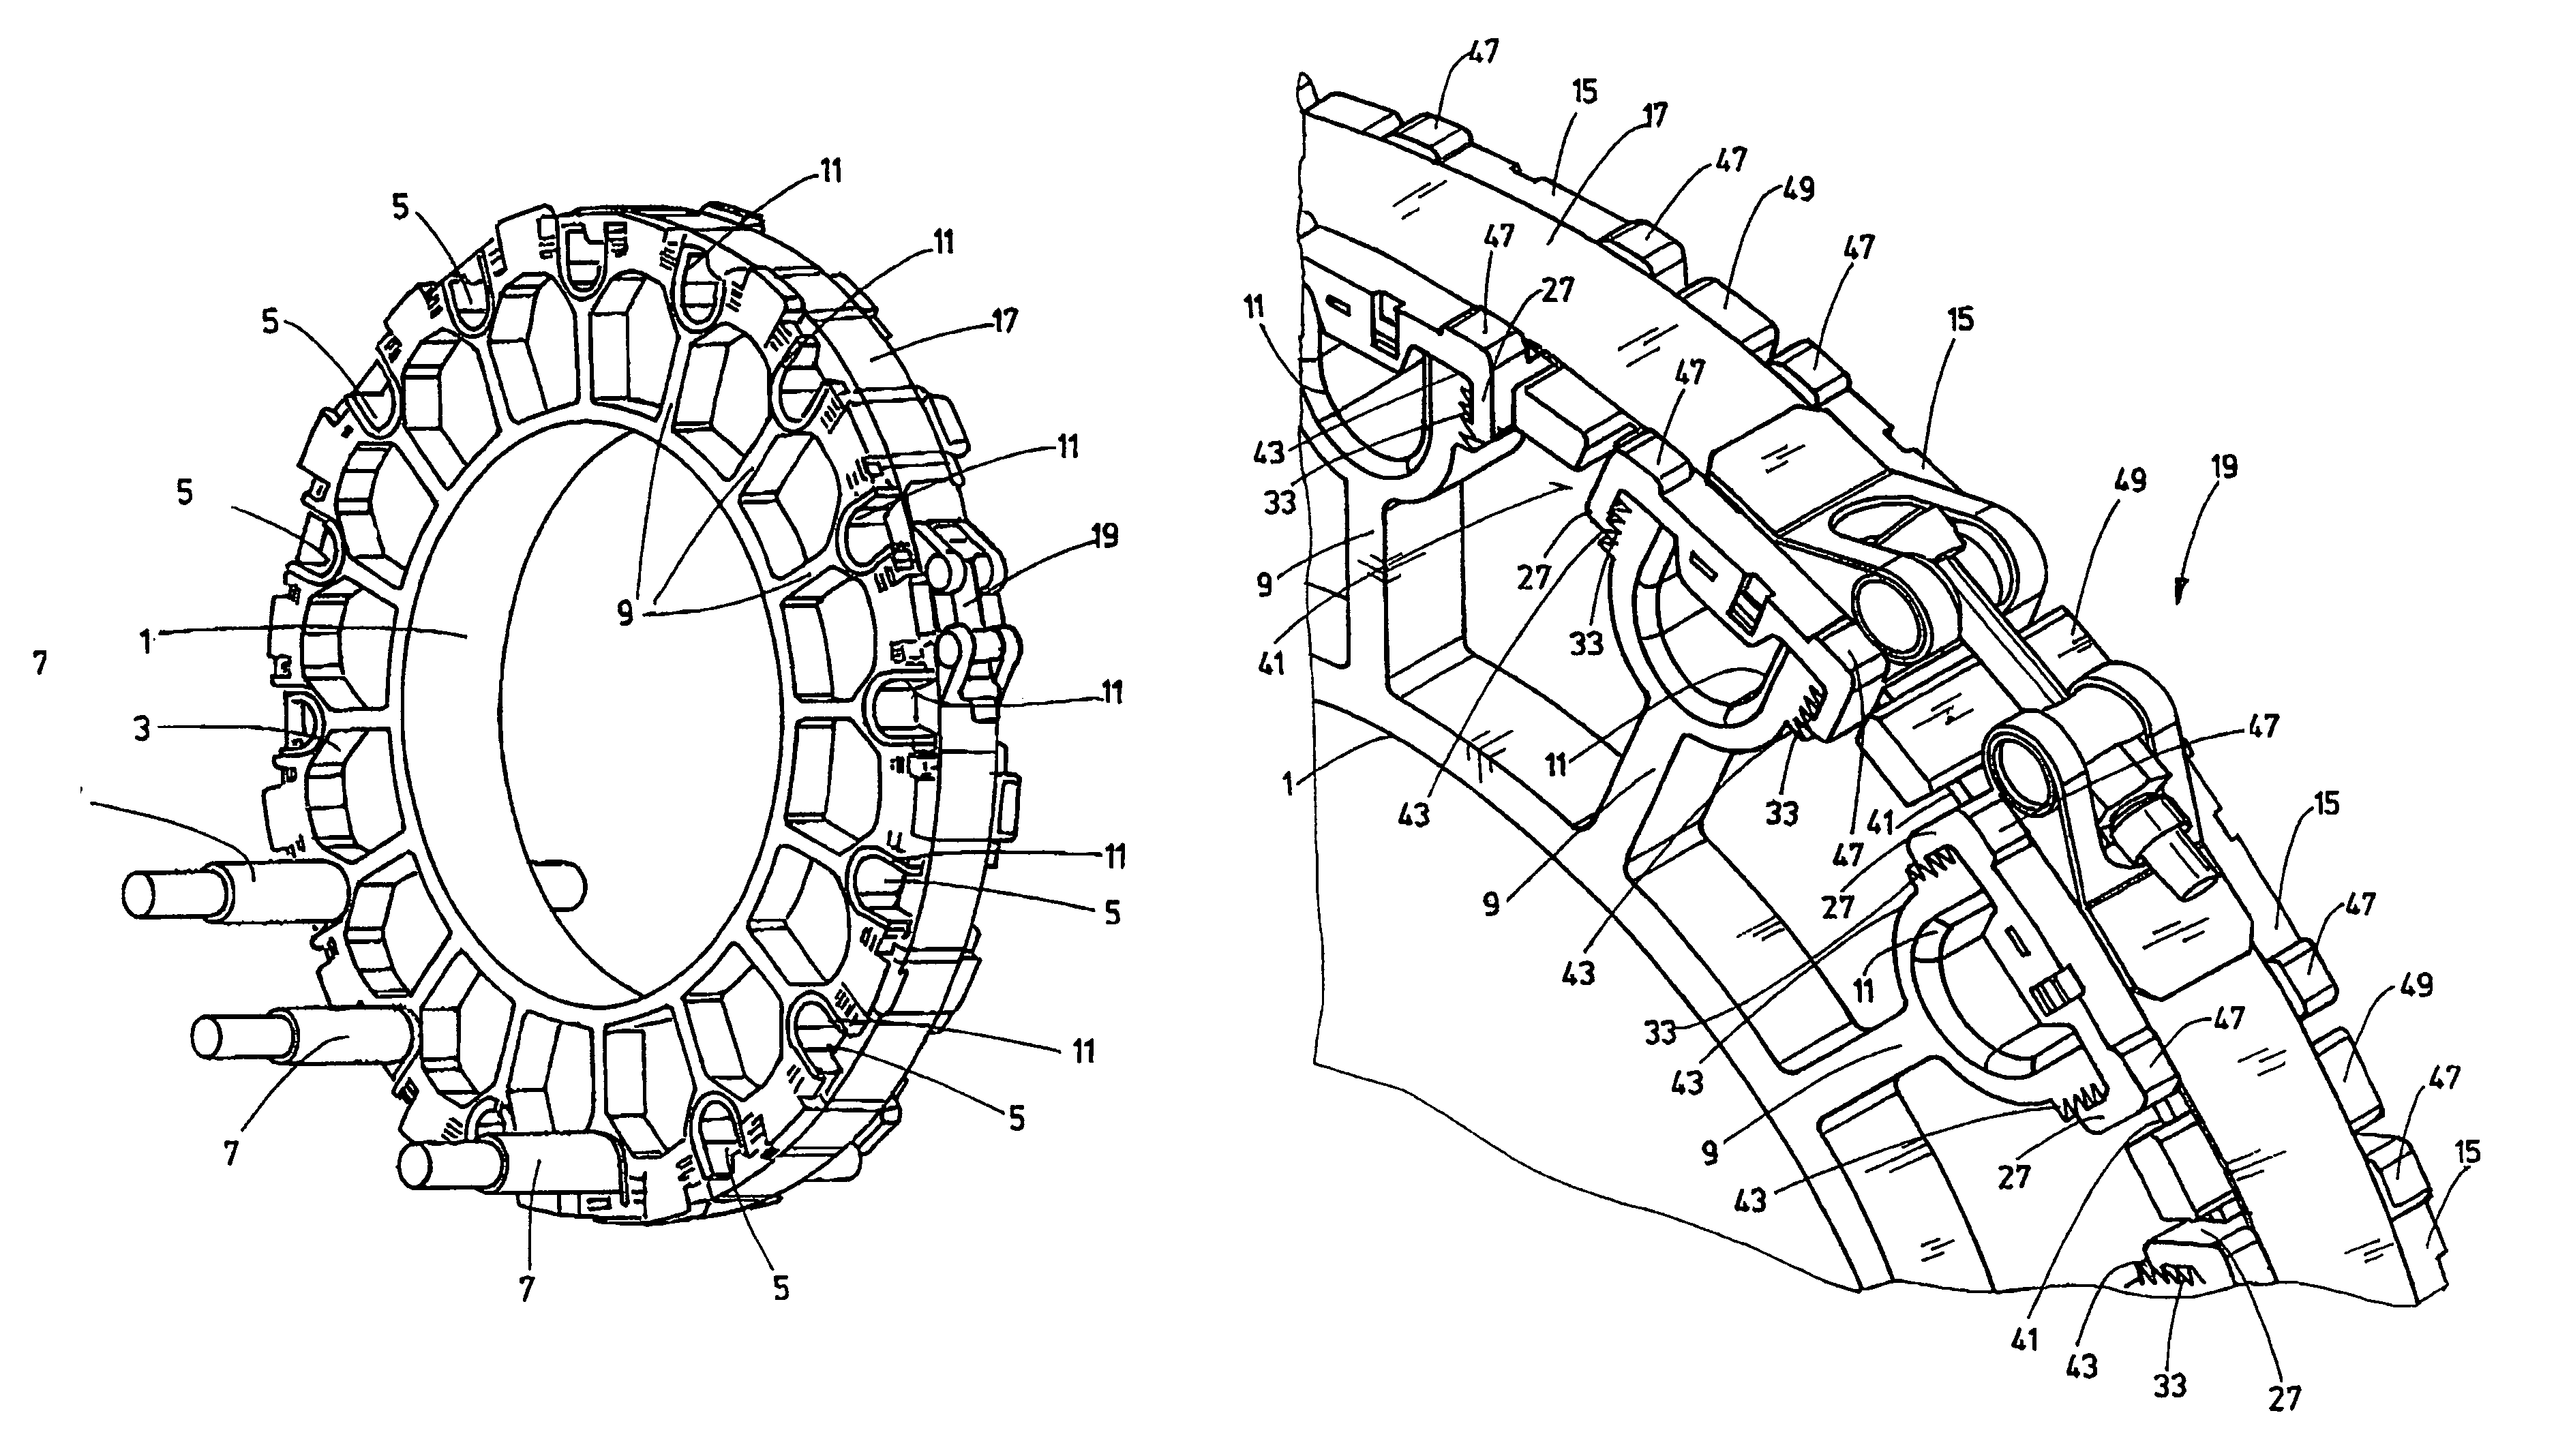 Attachment system for cables, in particular for wind turbines